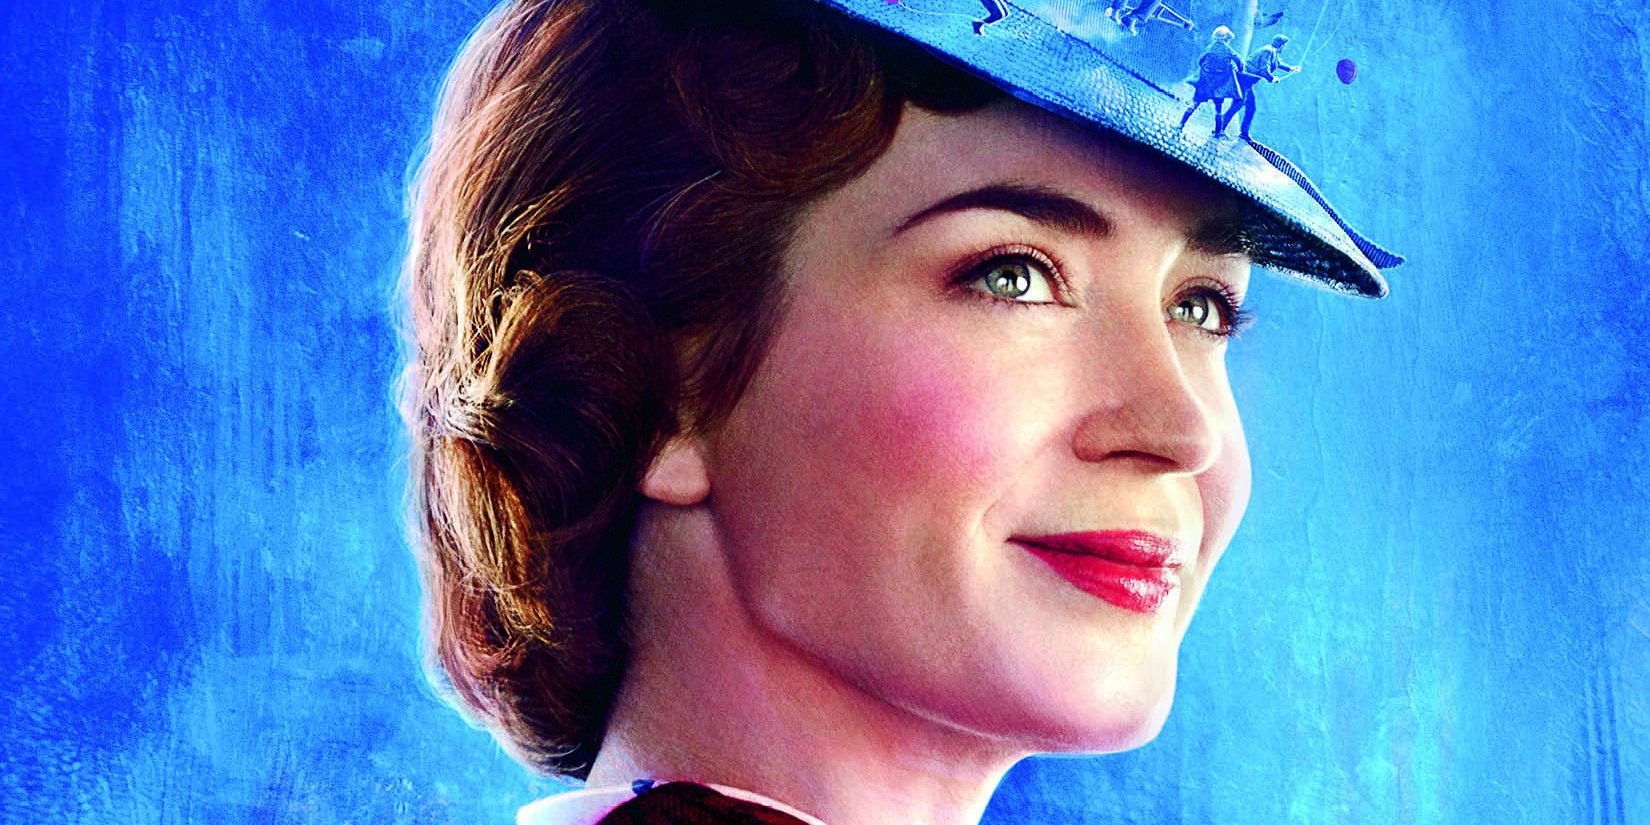 Emily Blunt as Mary Poppins in the Mary Poppins Returns poster